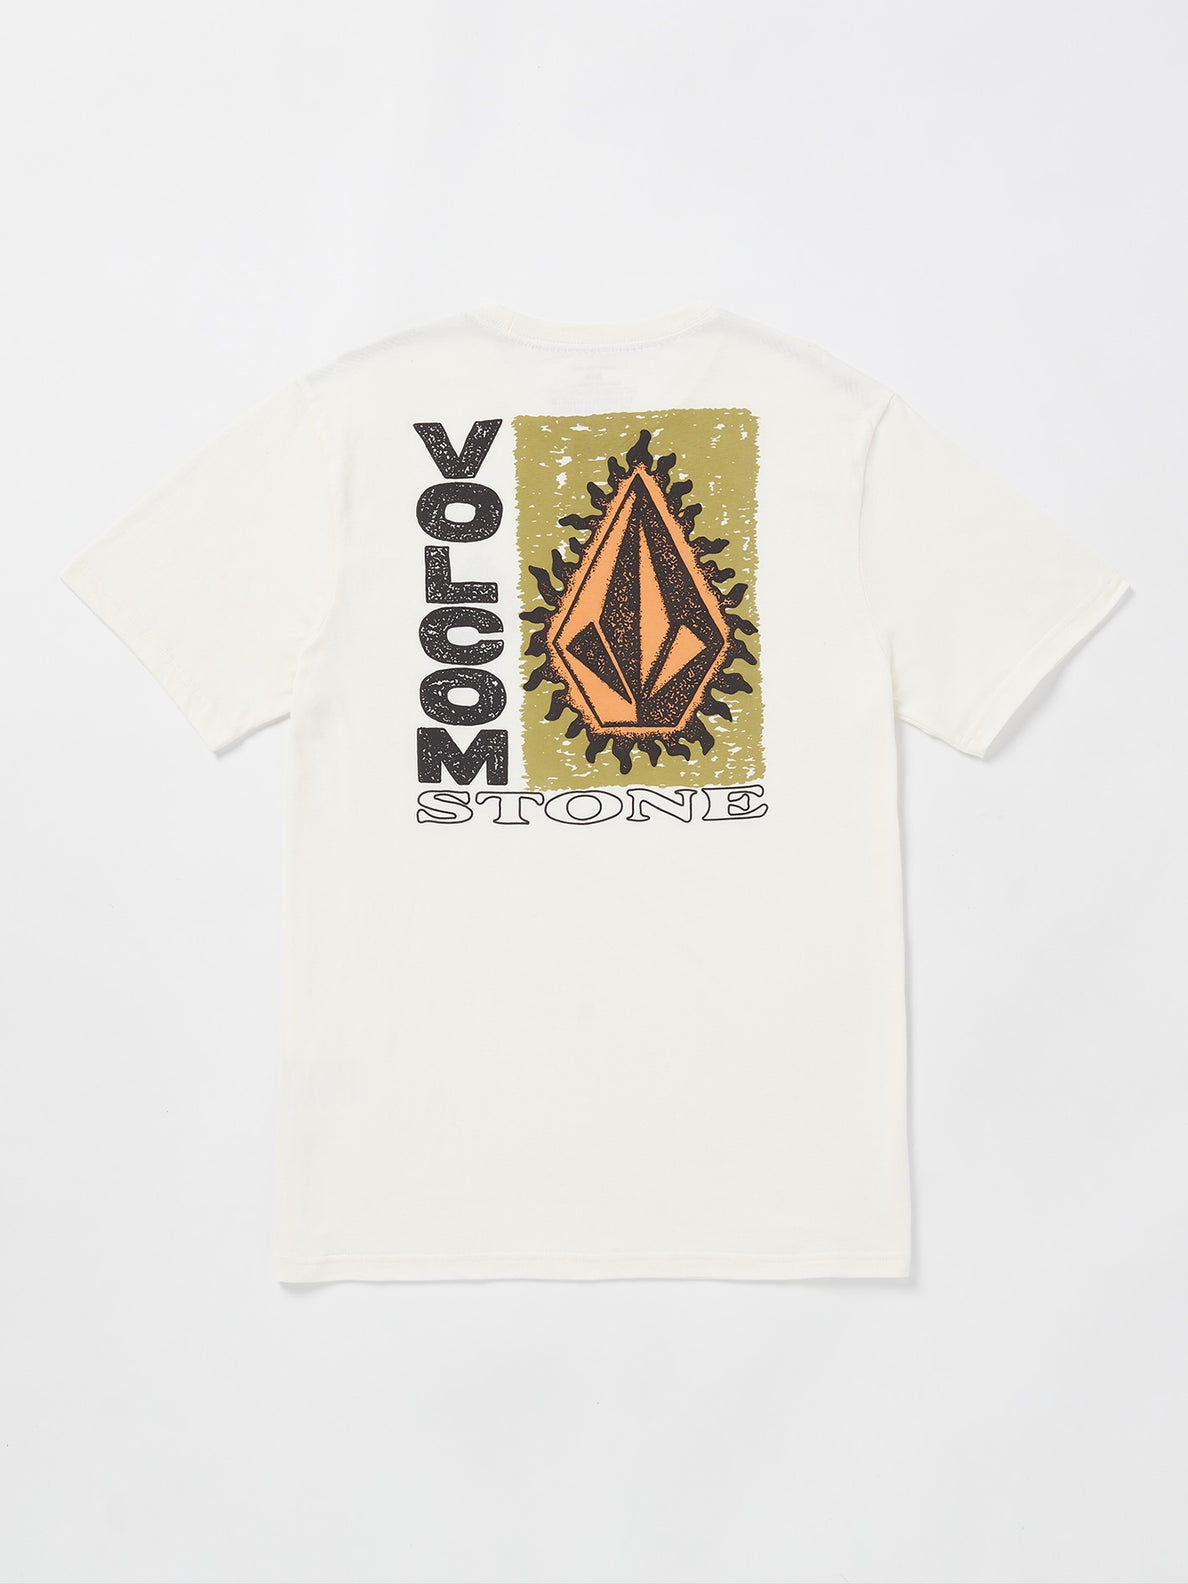 Flamed Short Sleeve Tee - Off White